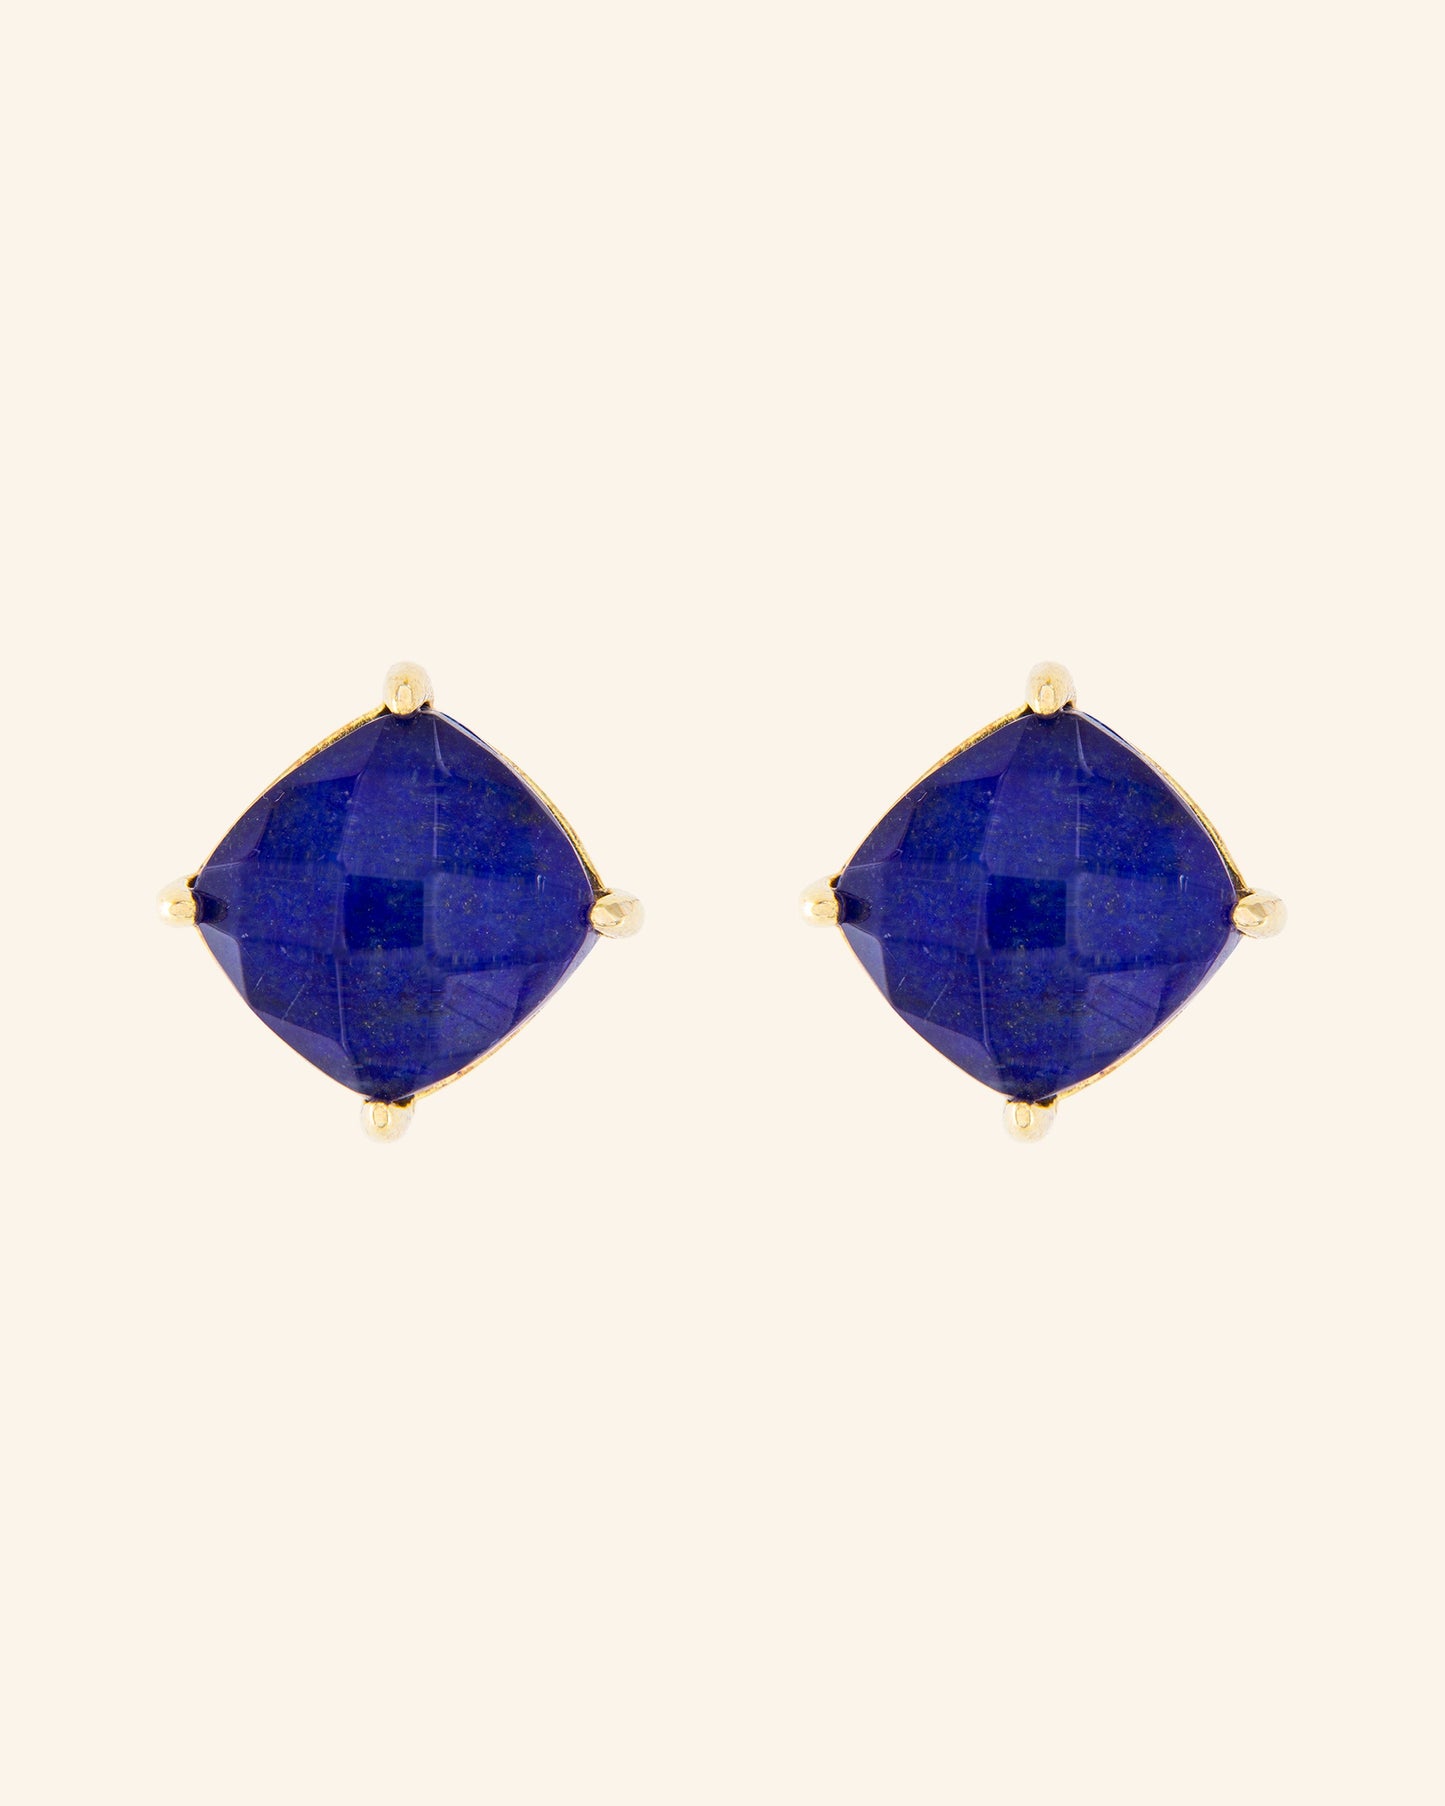 Big Candy earrings with lapis lazuli